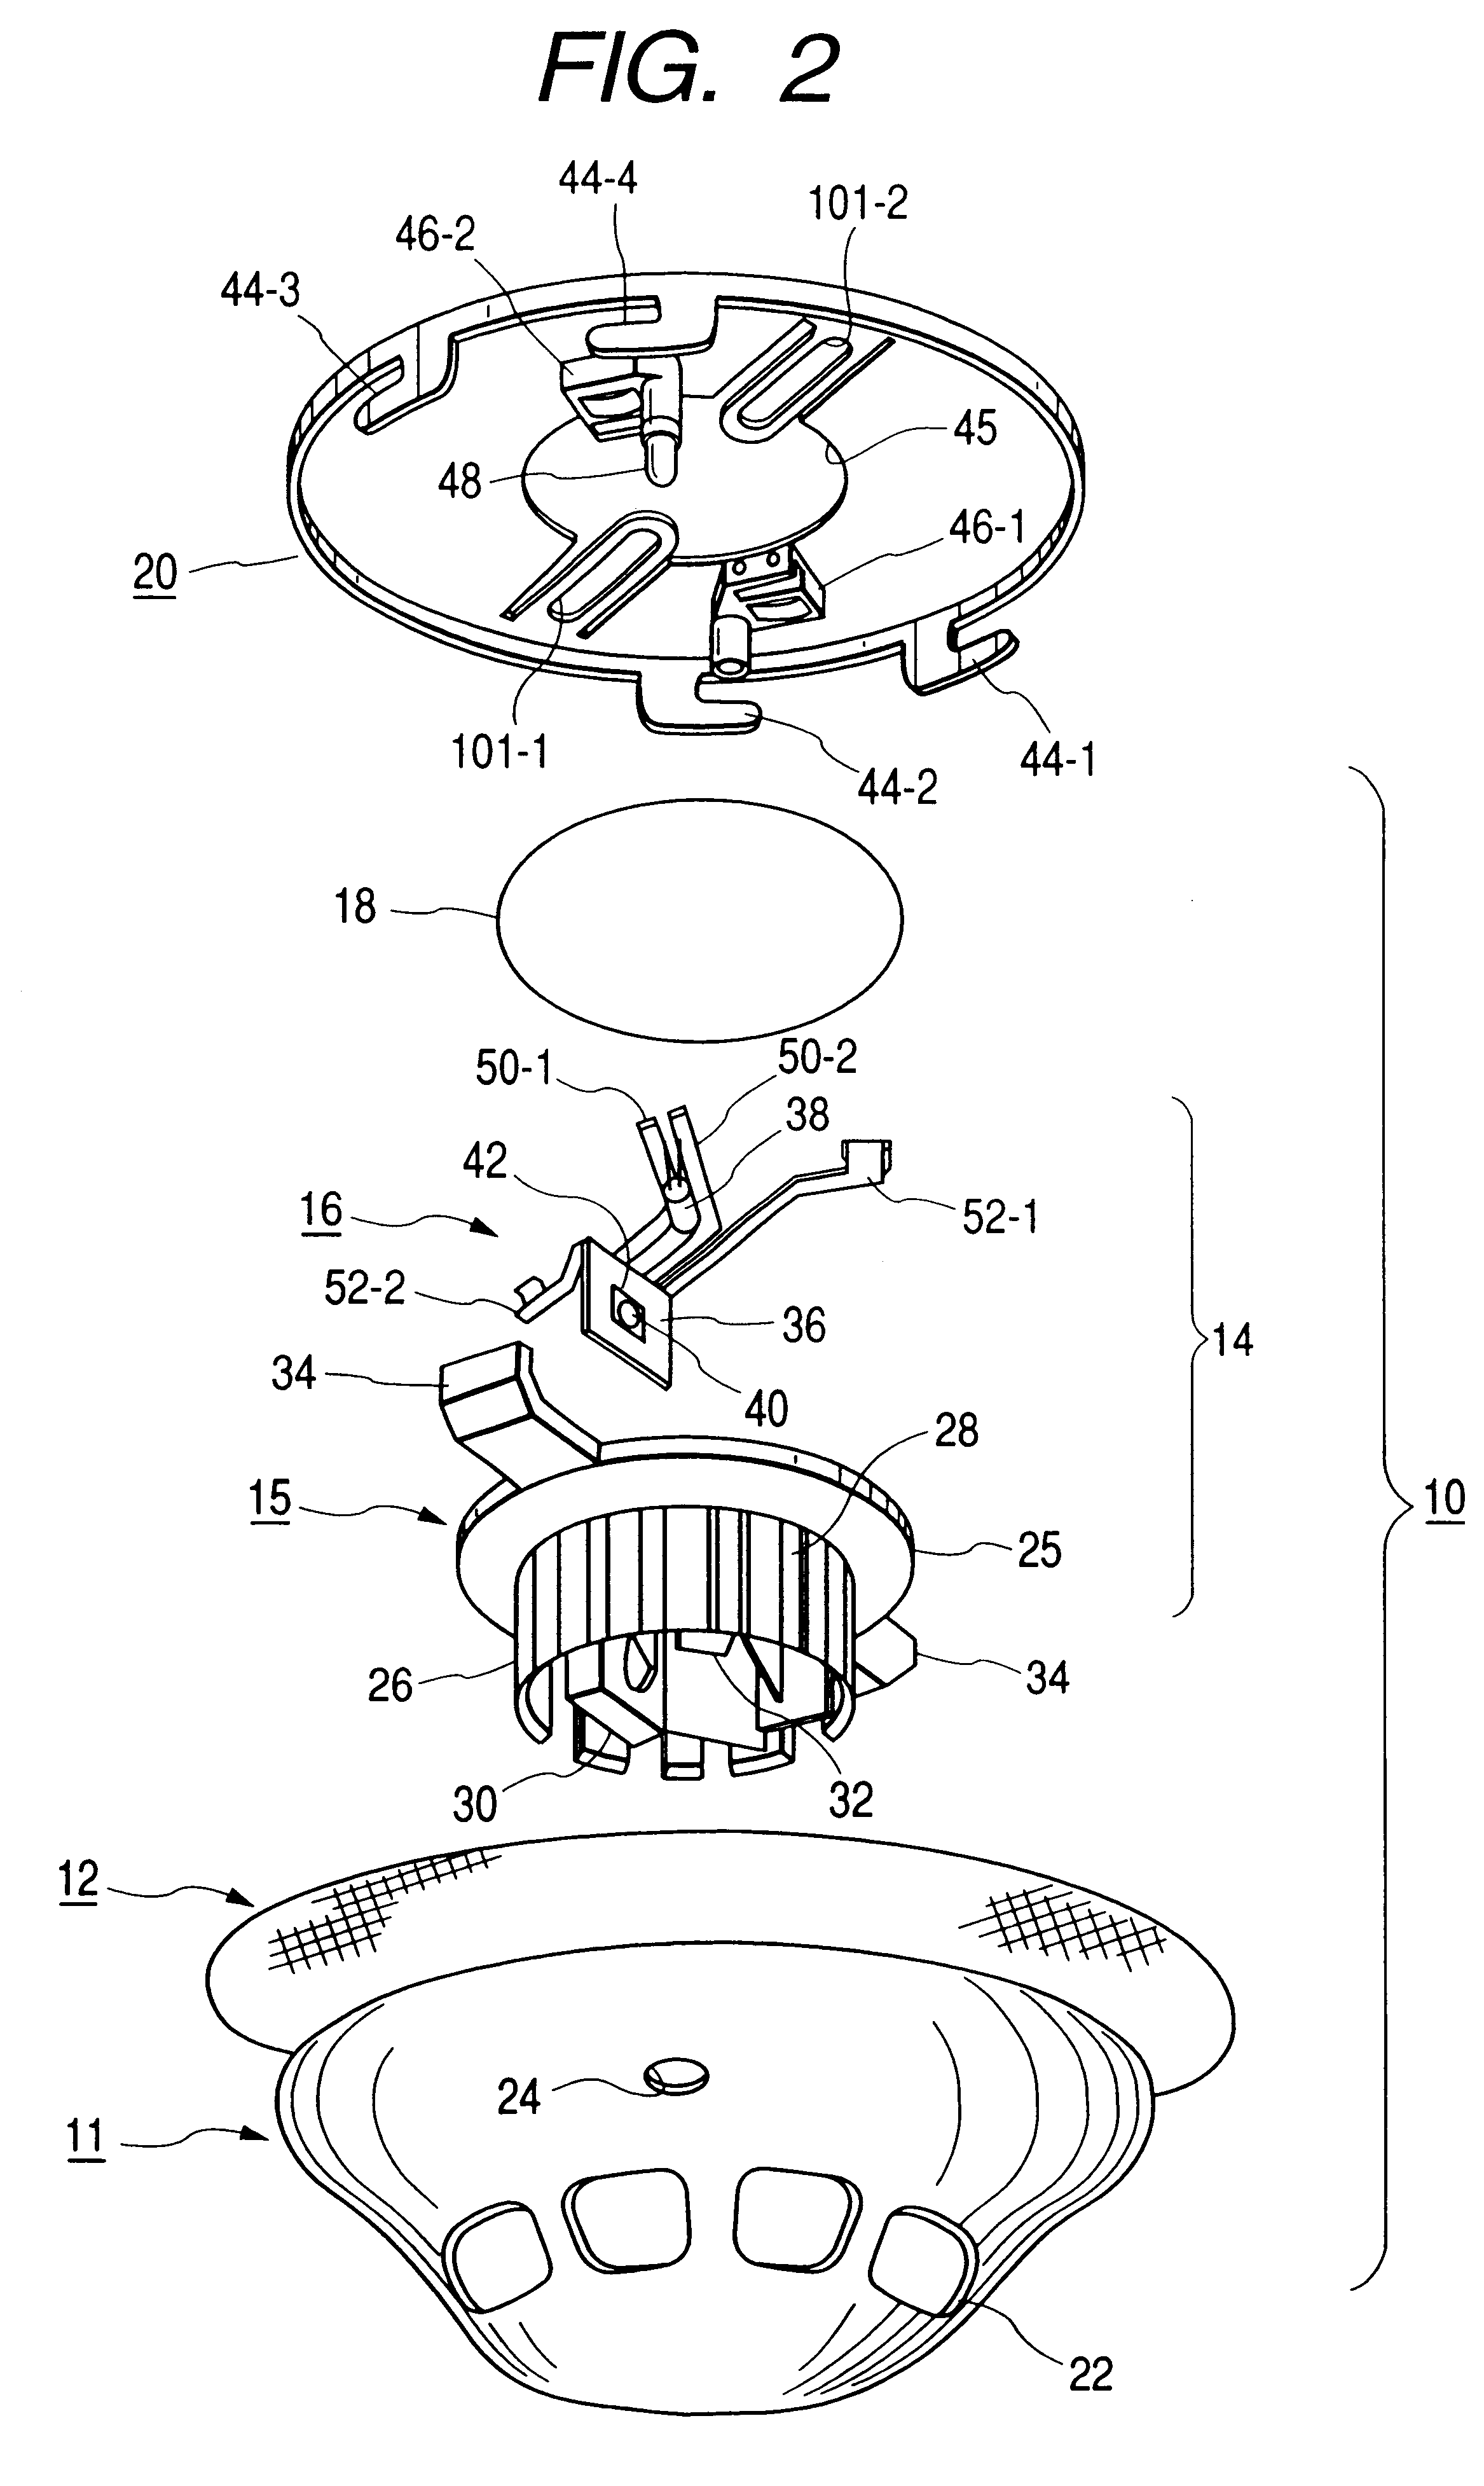 Photoelectric smoke detector, and smoke detection section assembly